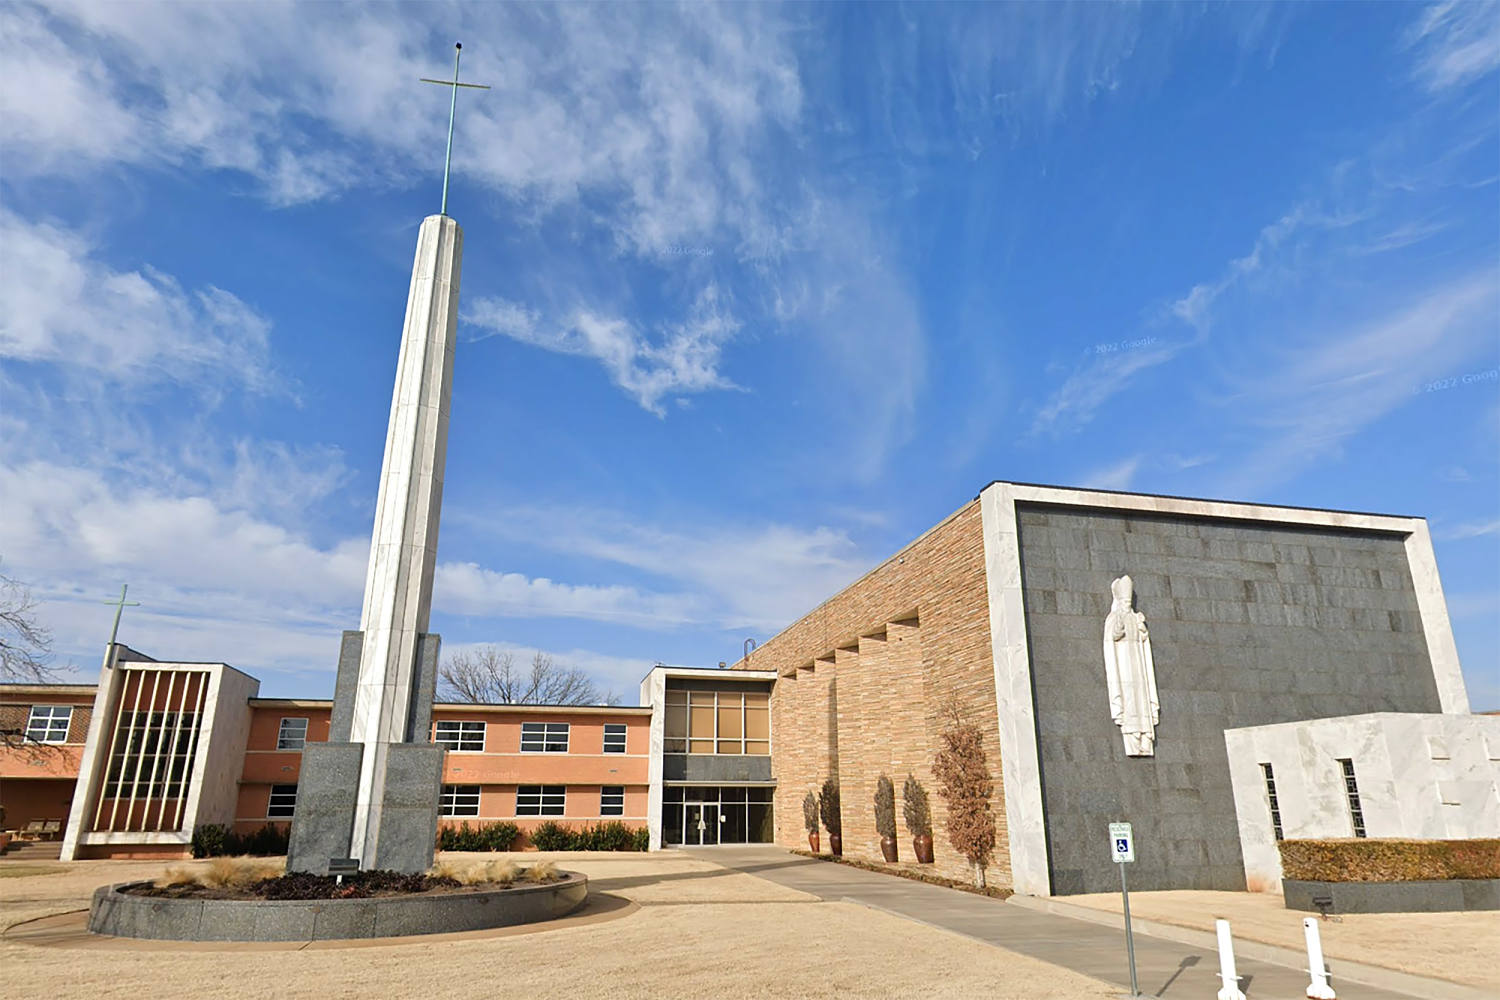 Oklahoma high court rejects plan for publicly funded religious school